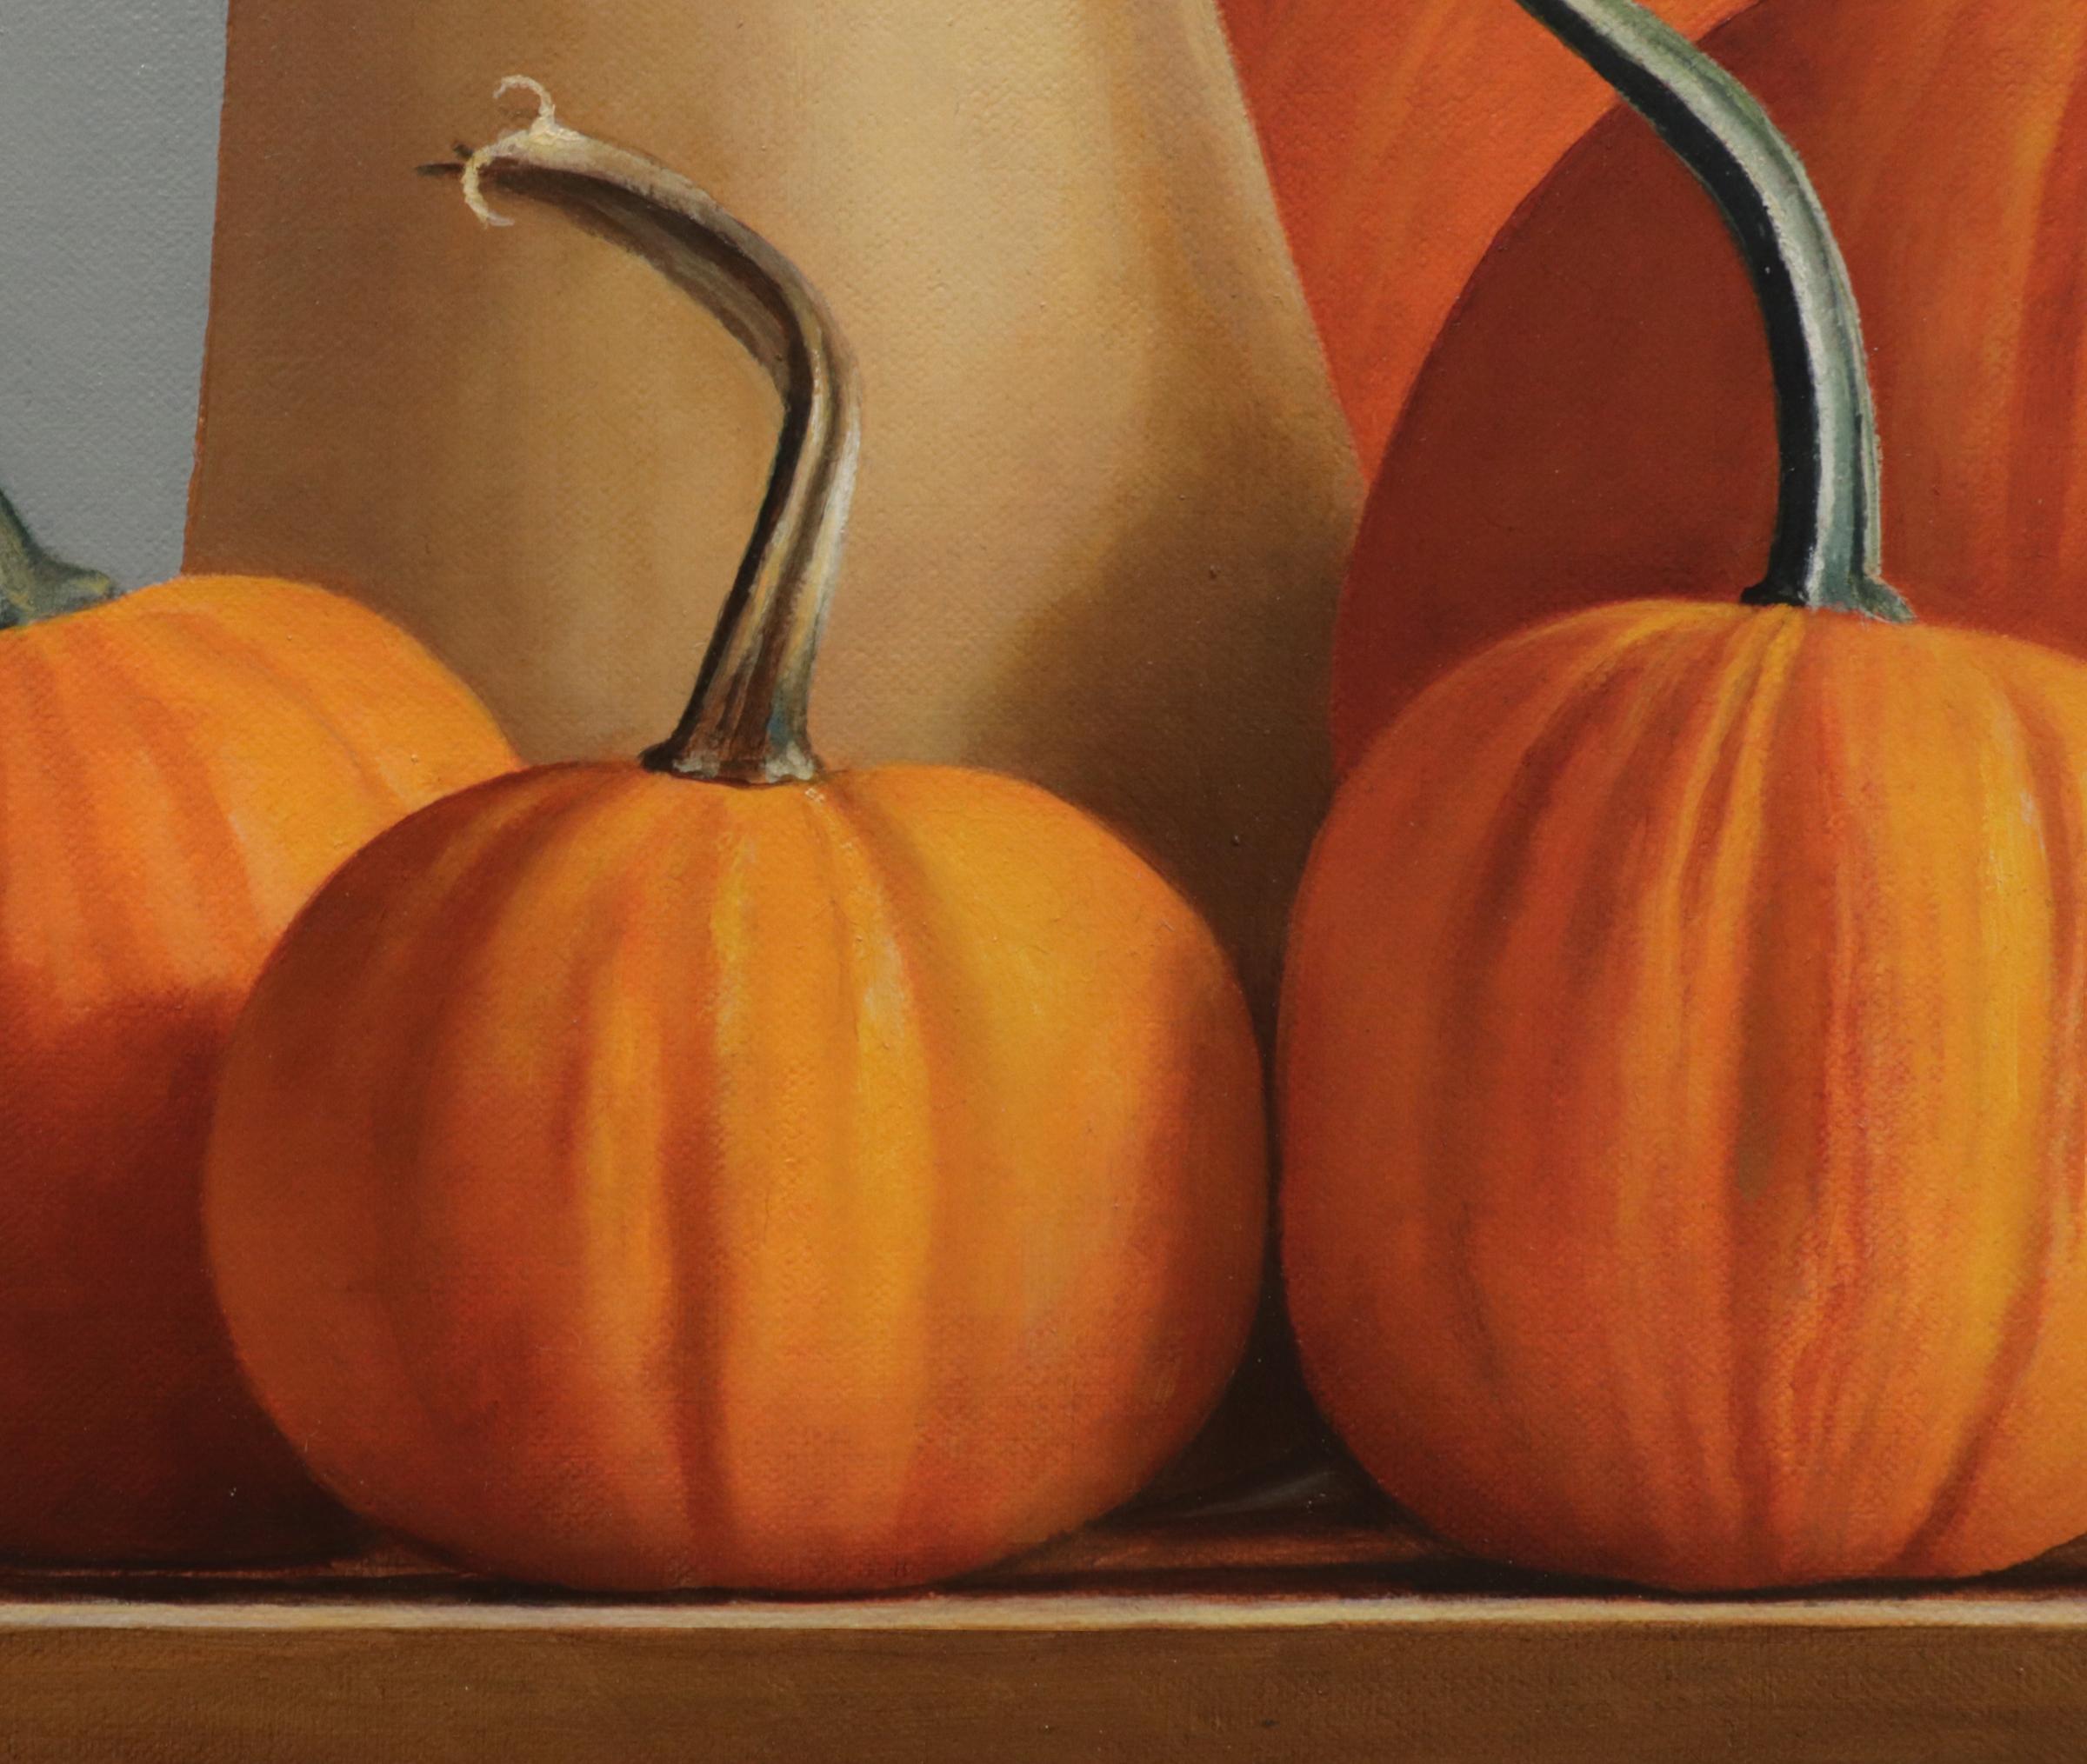 SQUASH AND PUMPKINS, photo-realism, still life, fruits and vegetables, orange - American Realist Painting by Janet Rickus